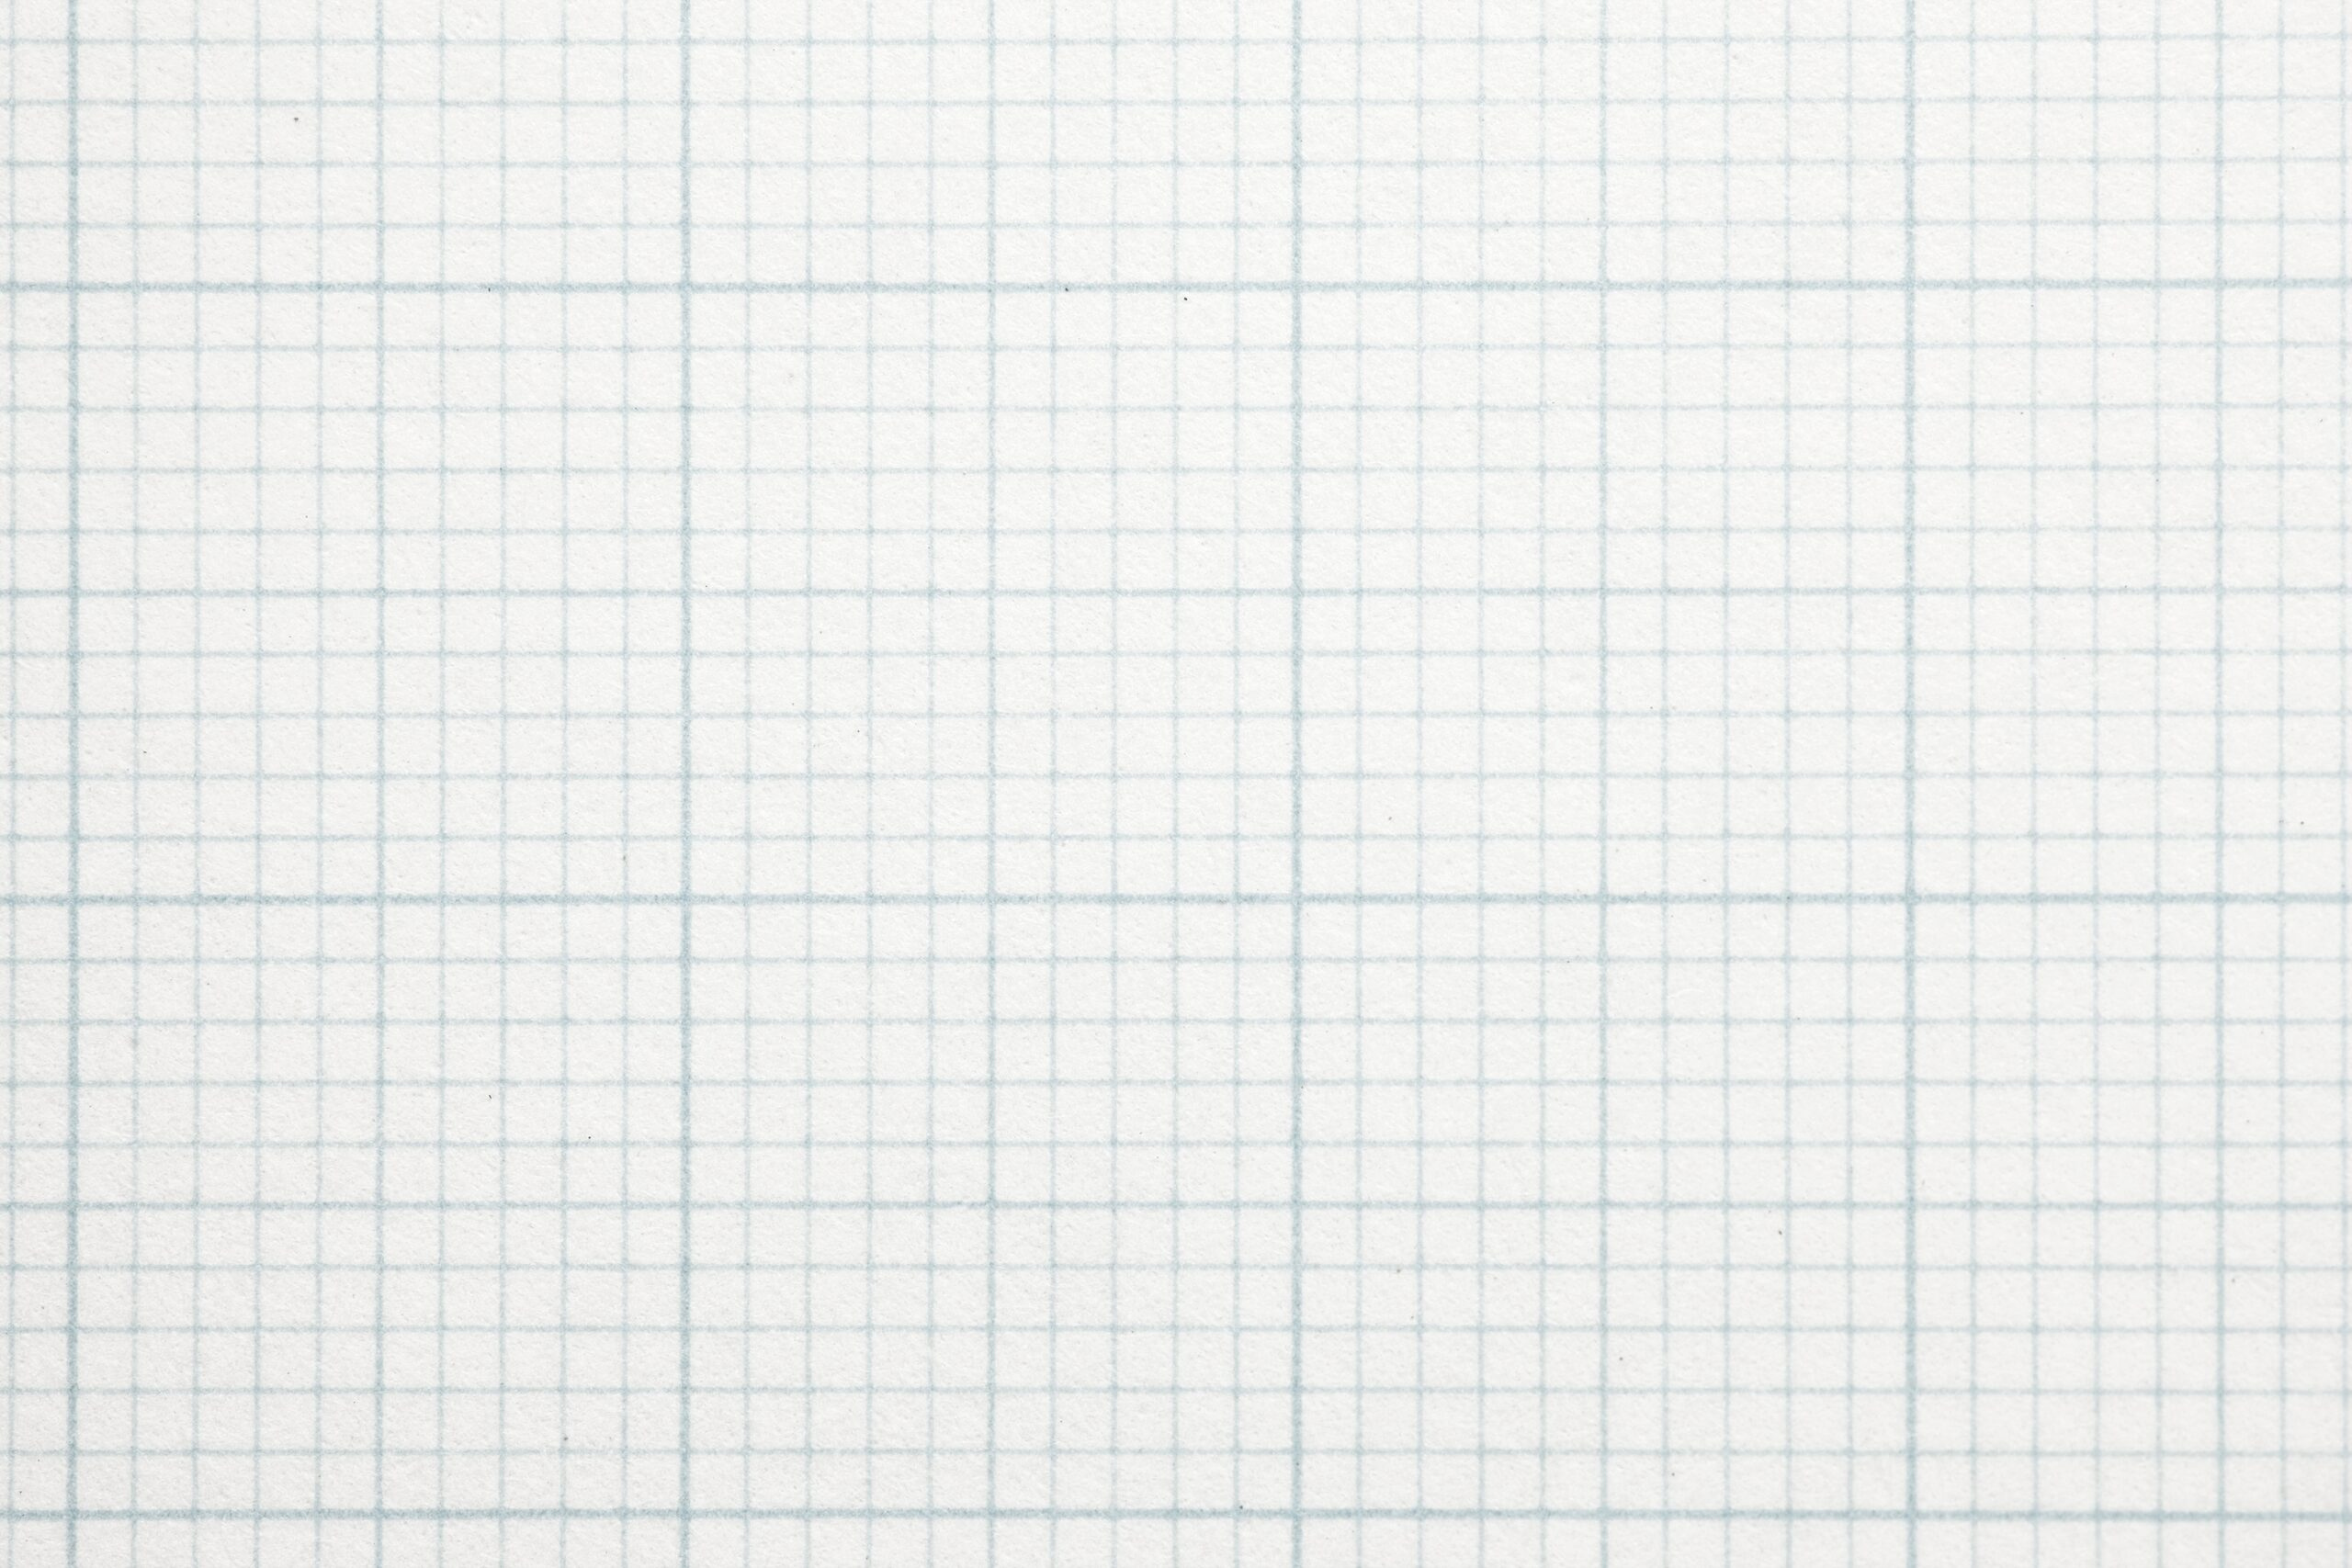 High Magnification Graph Grid Scale Paper Shot Perfectly Square